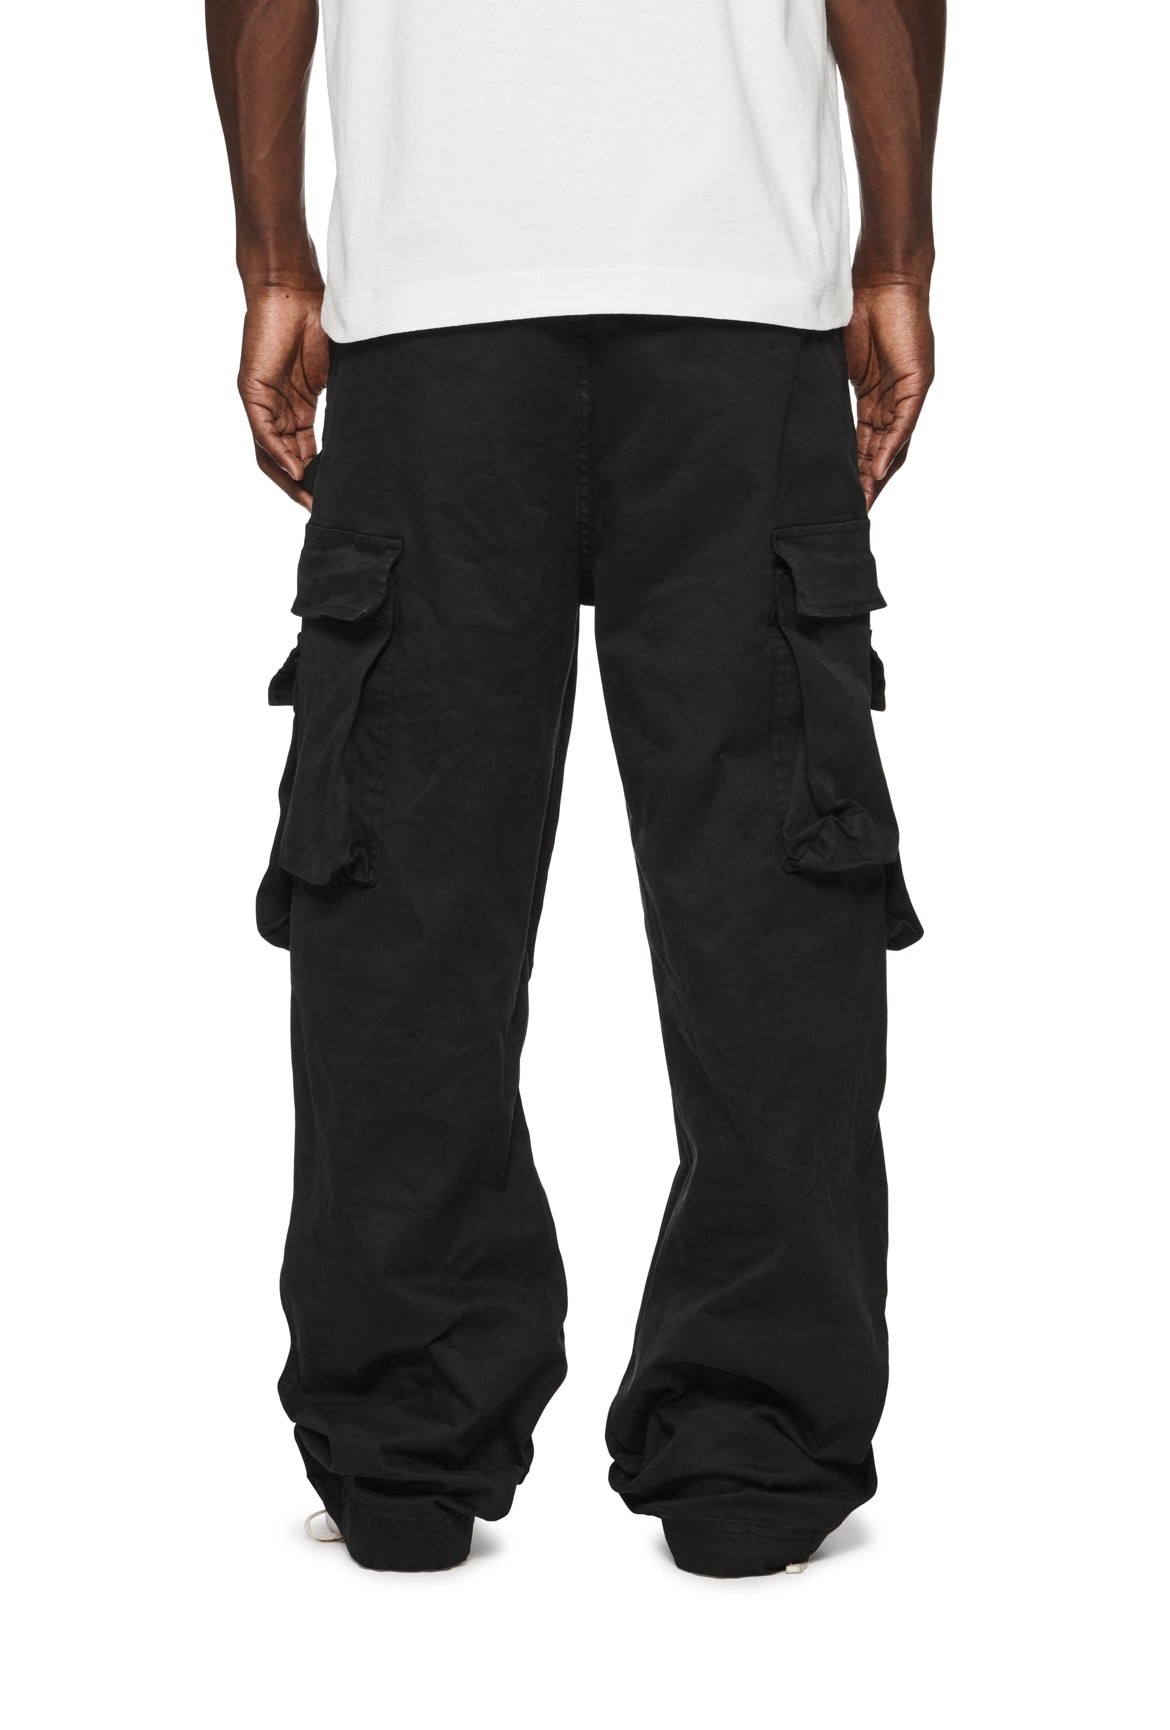 The back view of a man wearing PURPLE BRAND cargo pants, featuring numerous pockets.